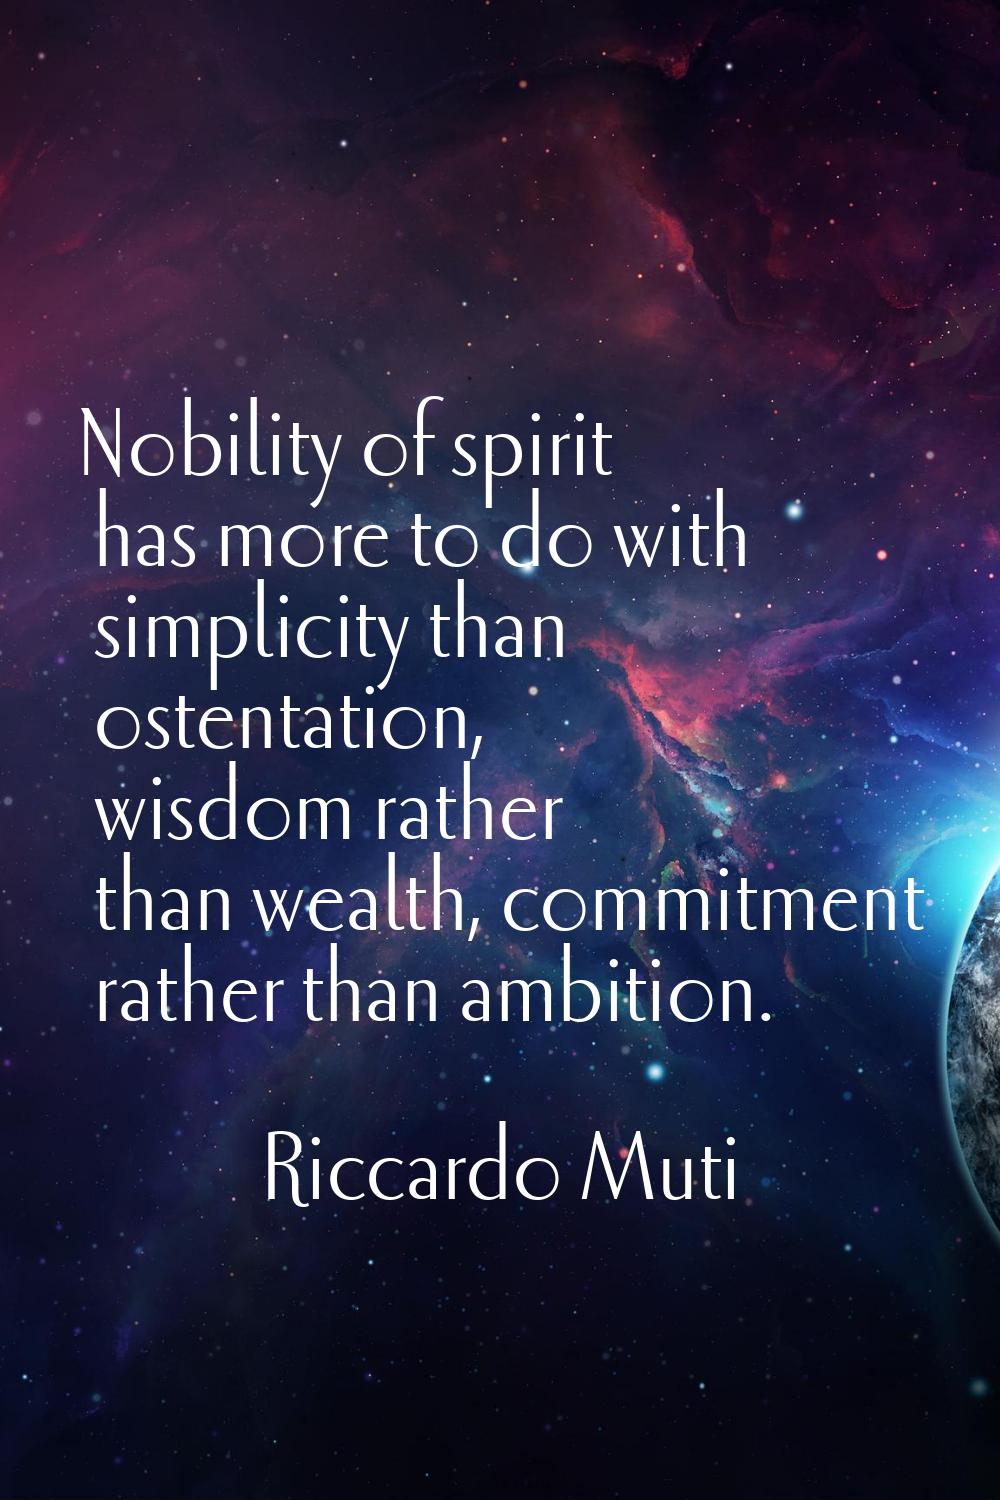 Nobility of spirit has more to do with simplicity than ostentation, wisdom rather than wealth, comm